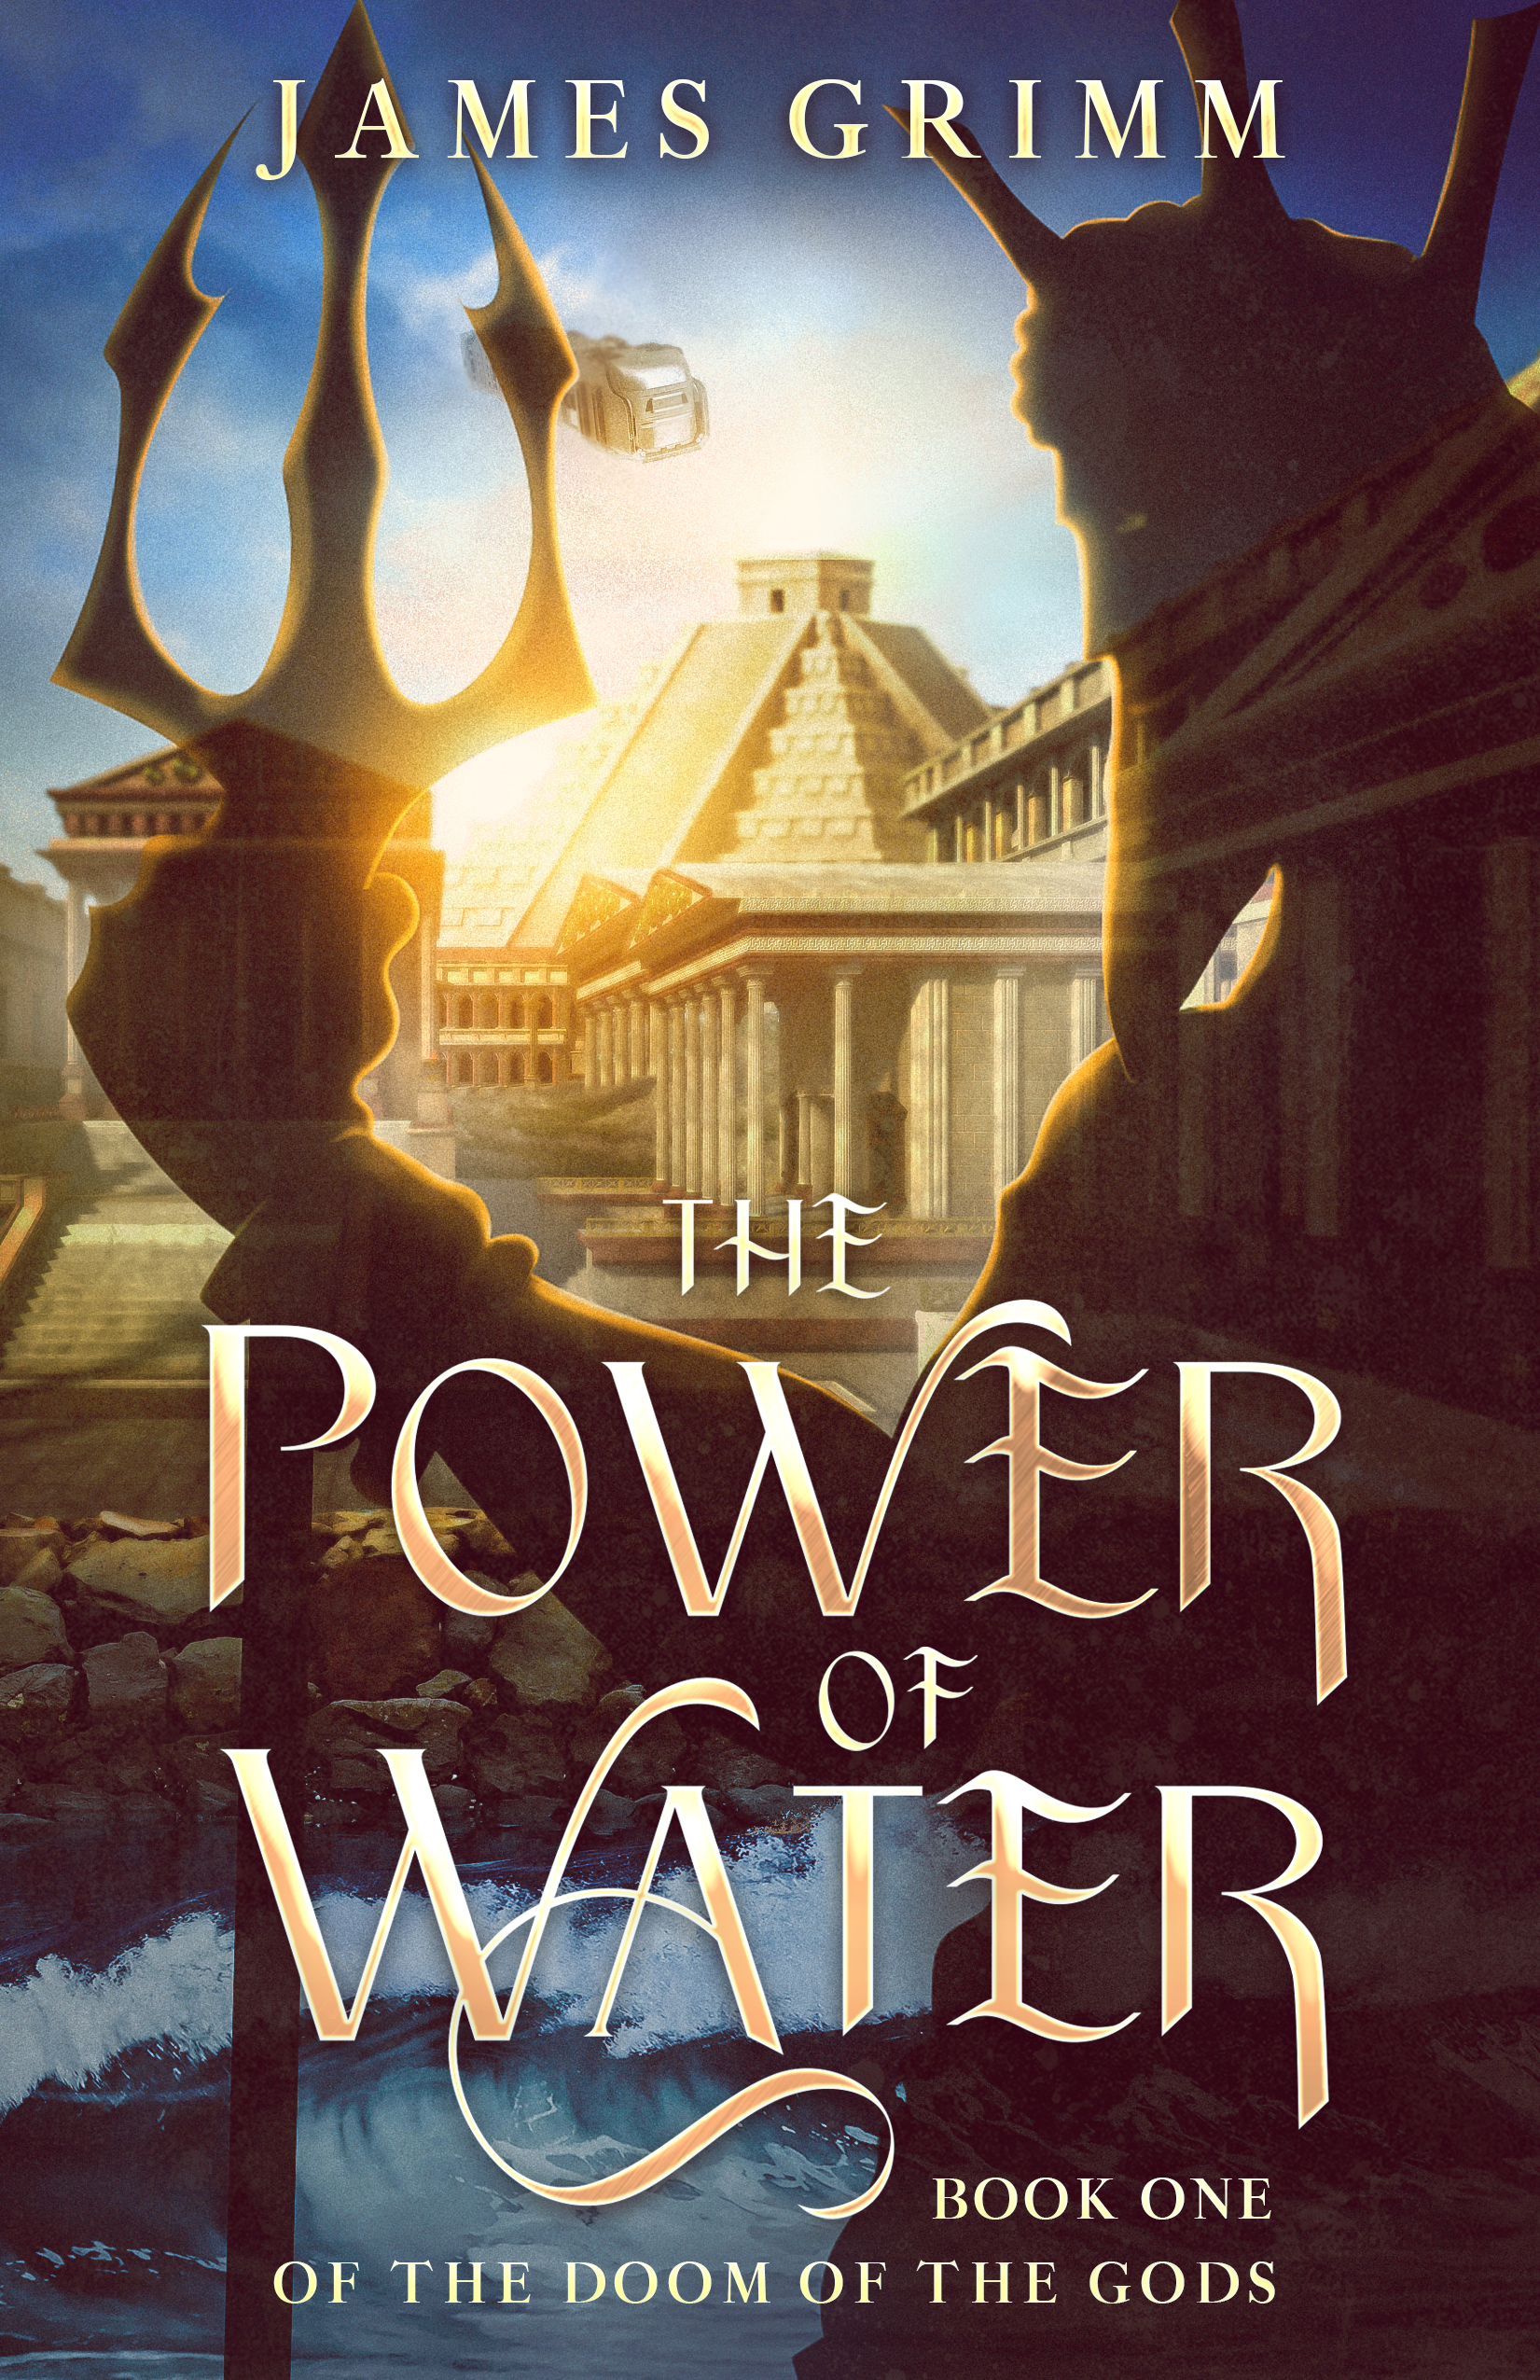 The Power of Water by James Grimm